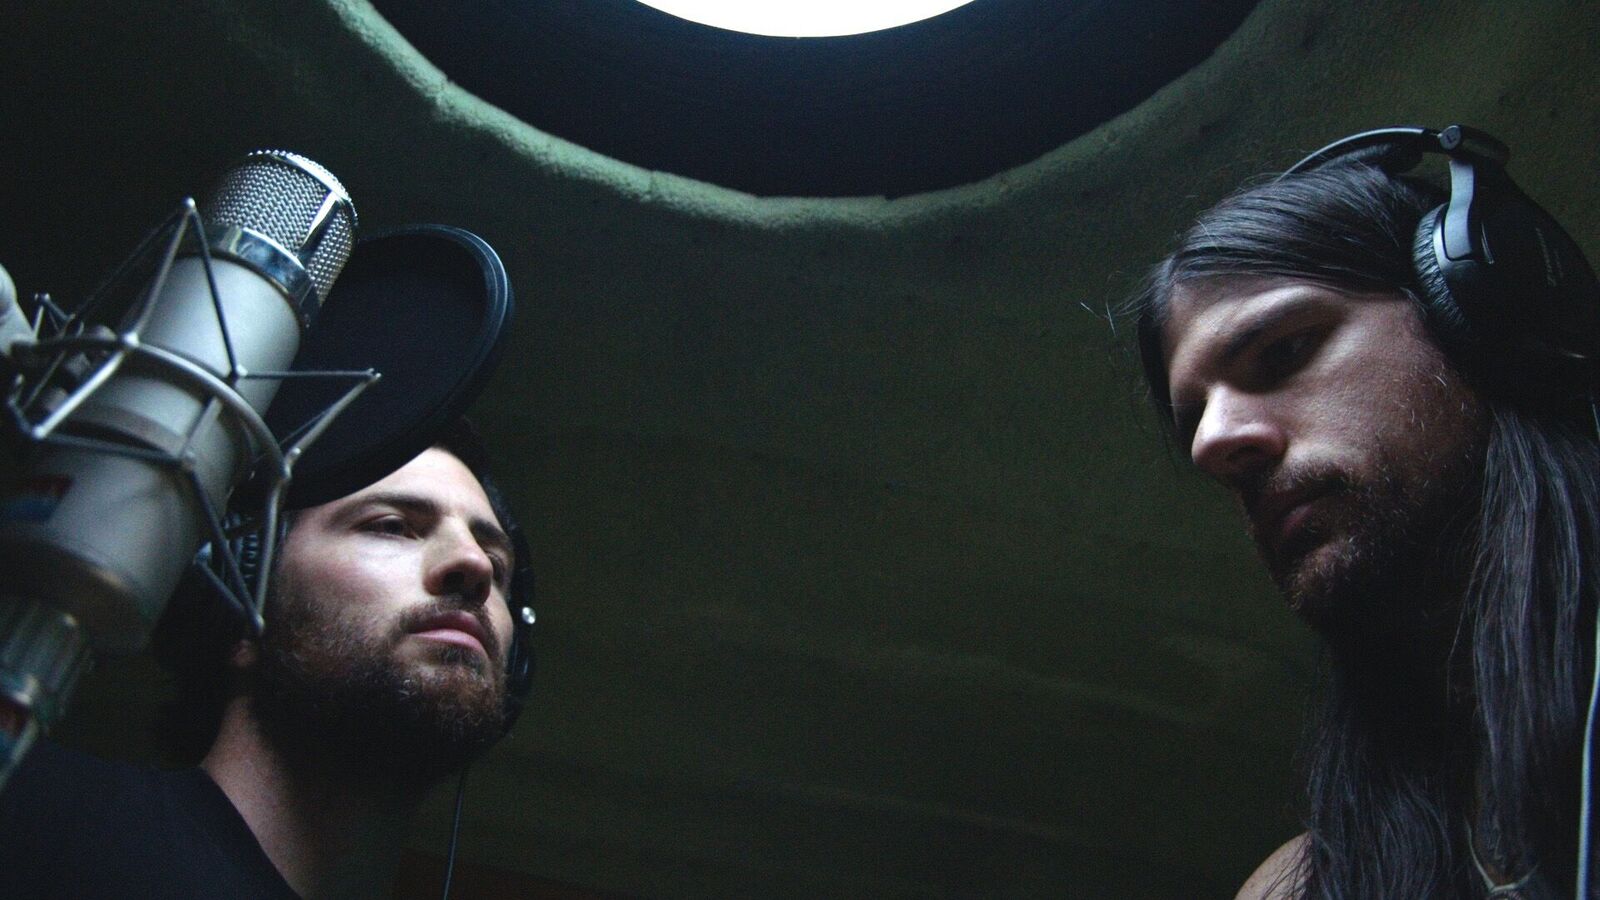 The Avett Brothers in an image from the documentary "May It Last." (Courtesy of Oscilloscope Laboratories)